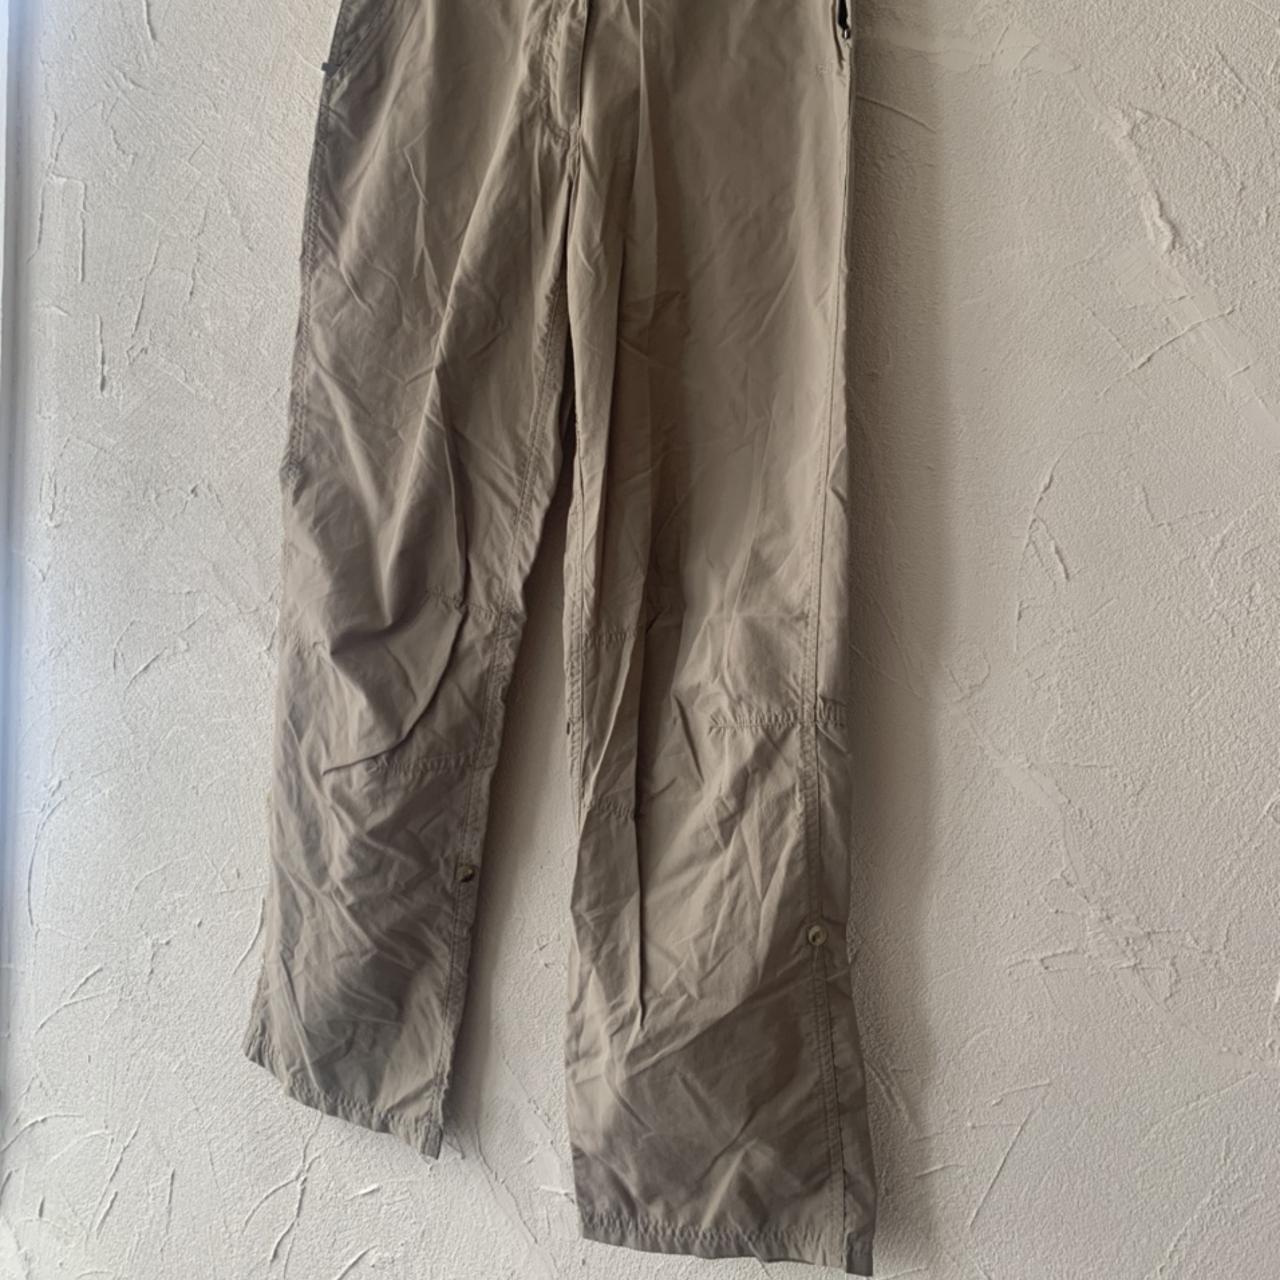 Product Image 2 - Vintage Trespass Outdoor Pants
No flaws
Size